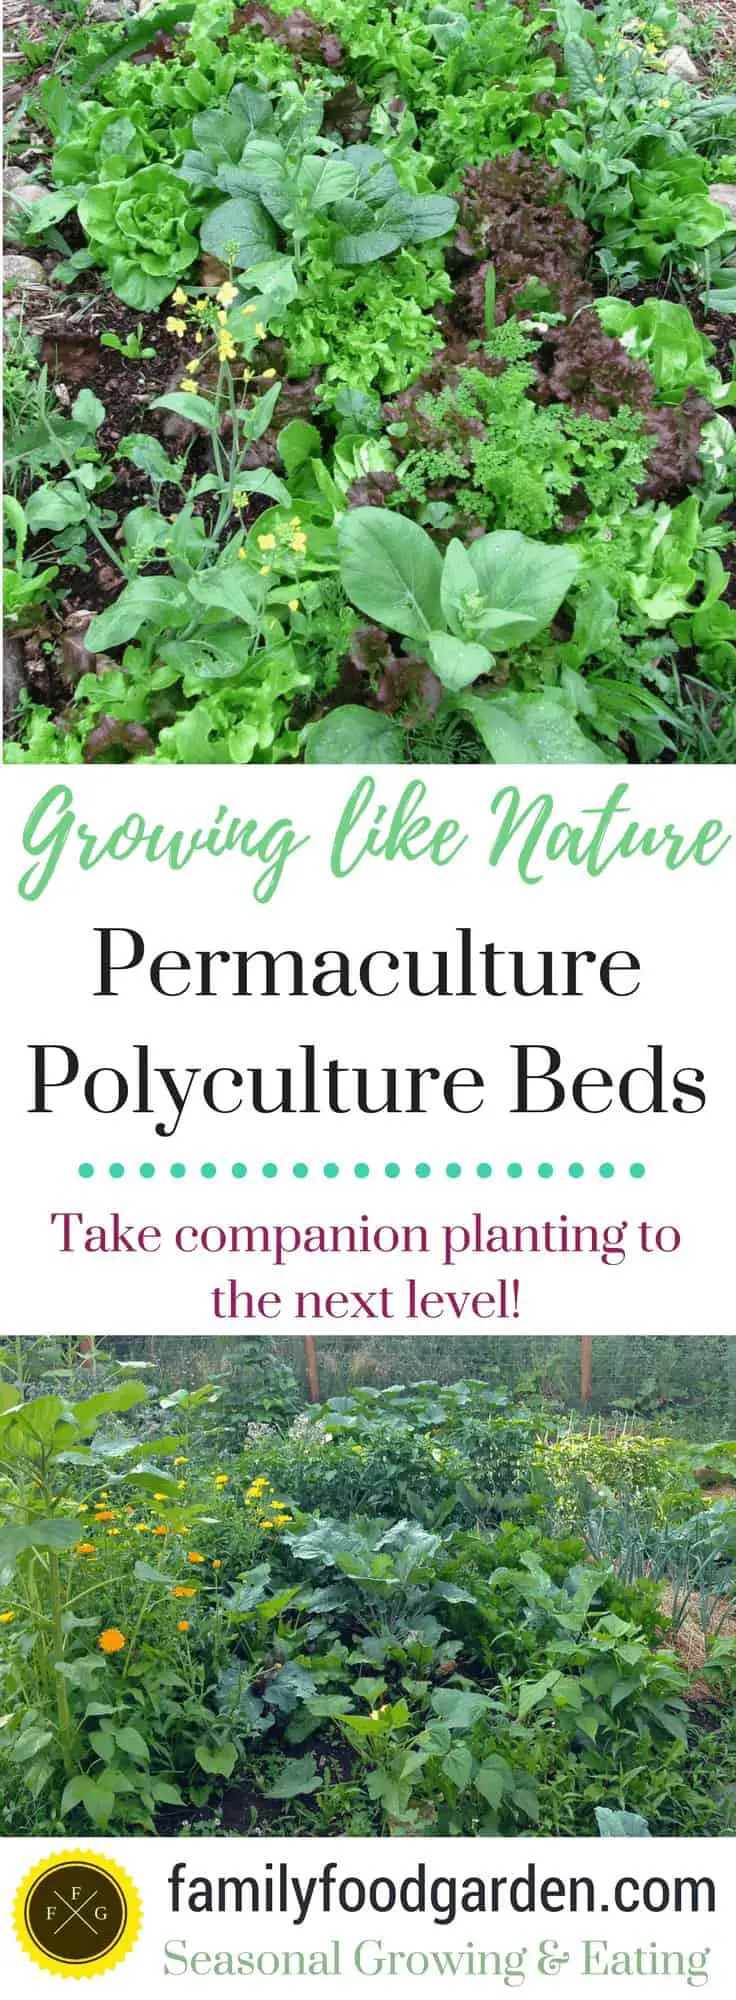 Polyculture permaculture gardening